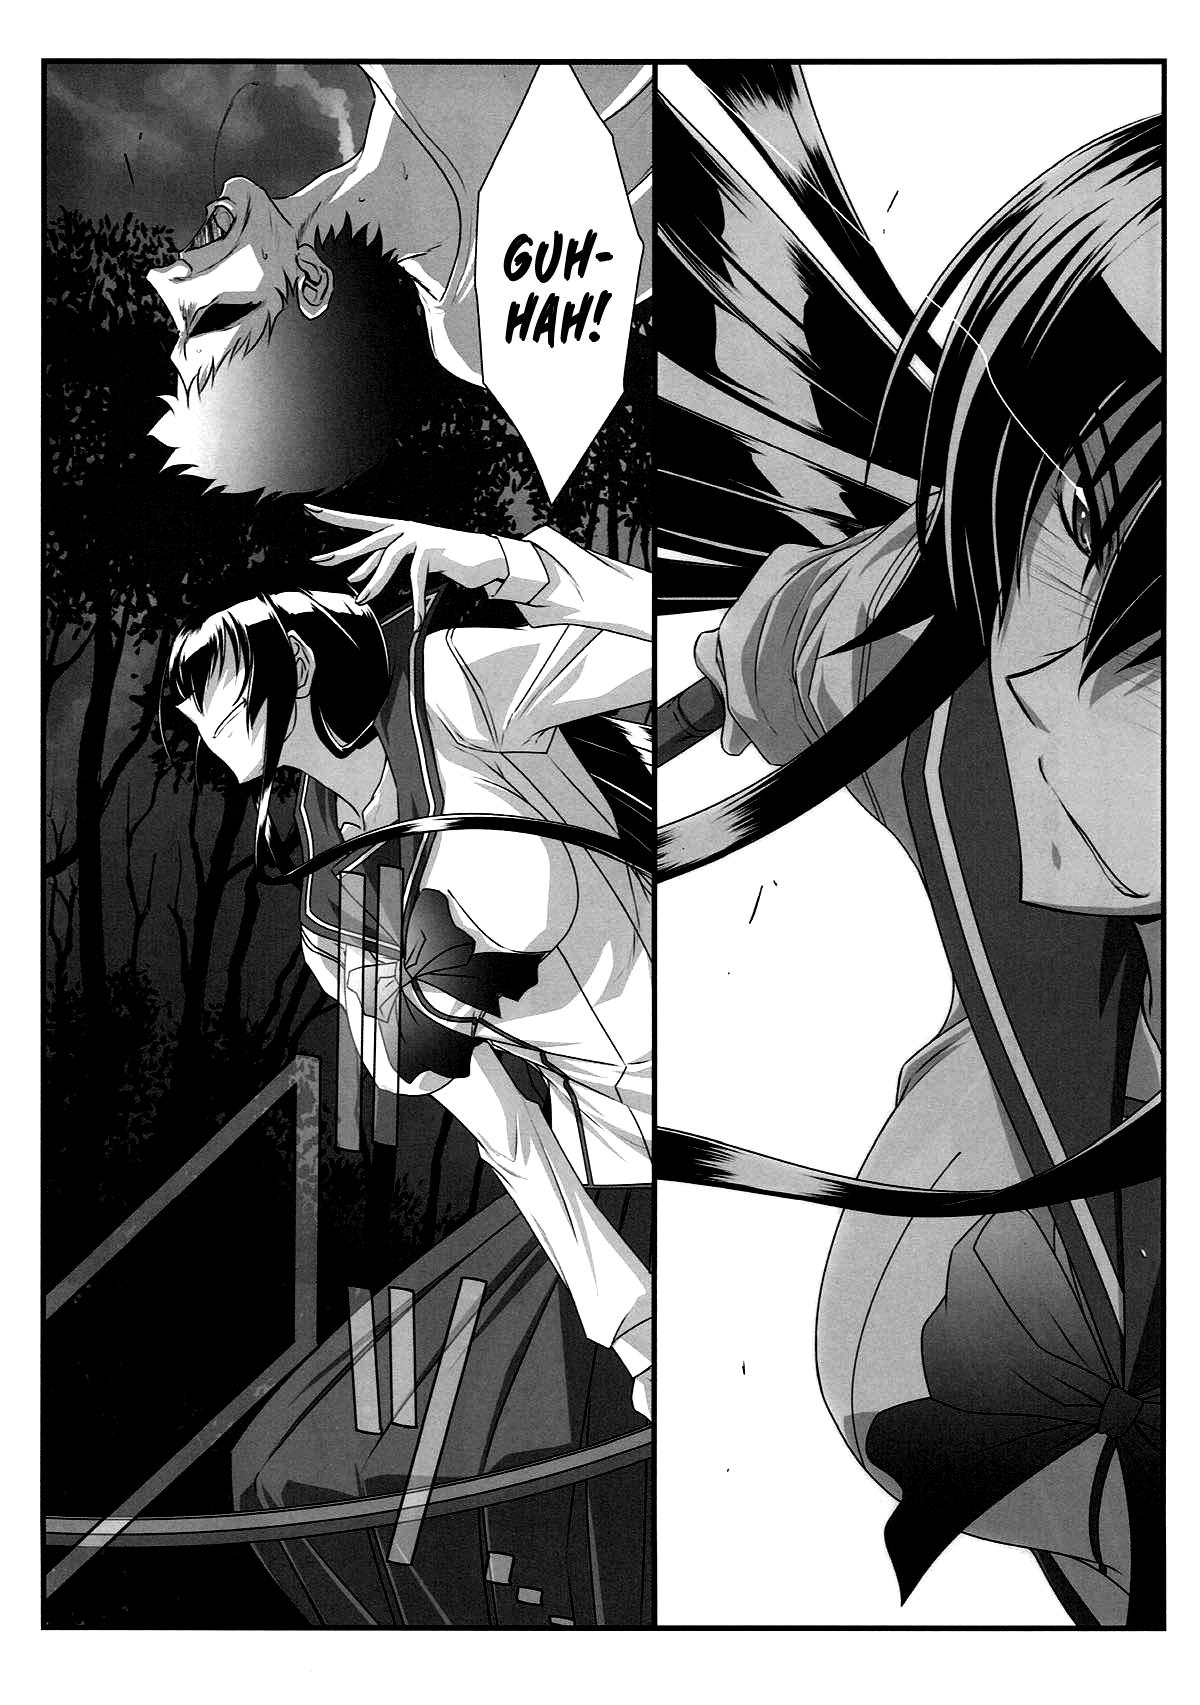 Underwear SPIRAL ZONE H.O.T.D - Highschool of the dead Rimming - Page 4